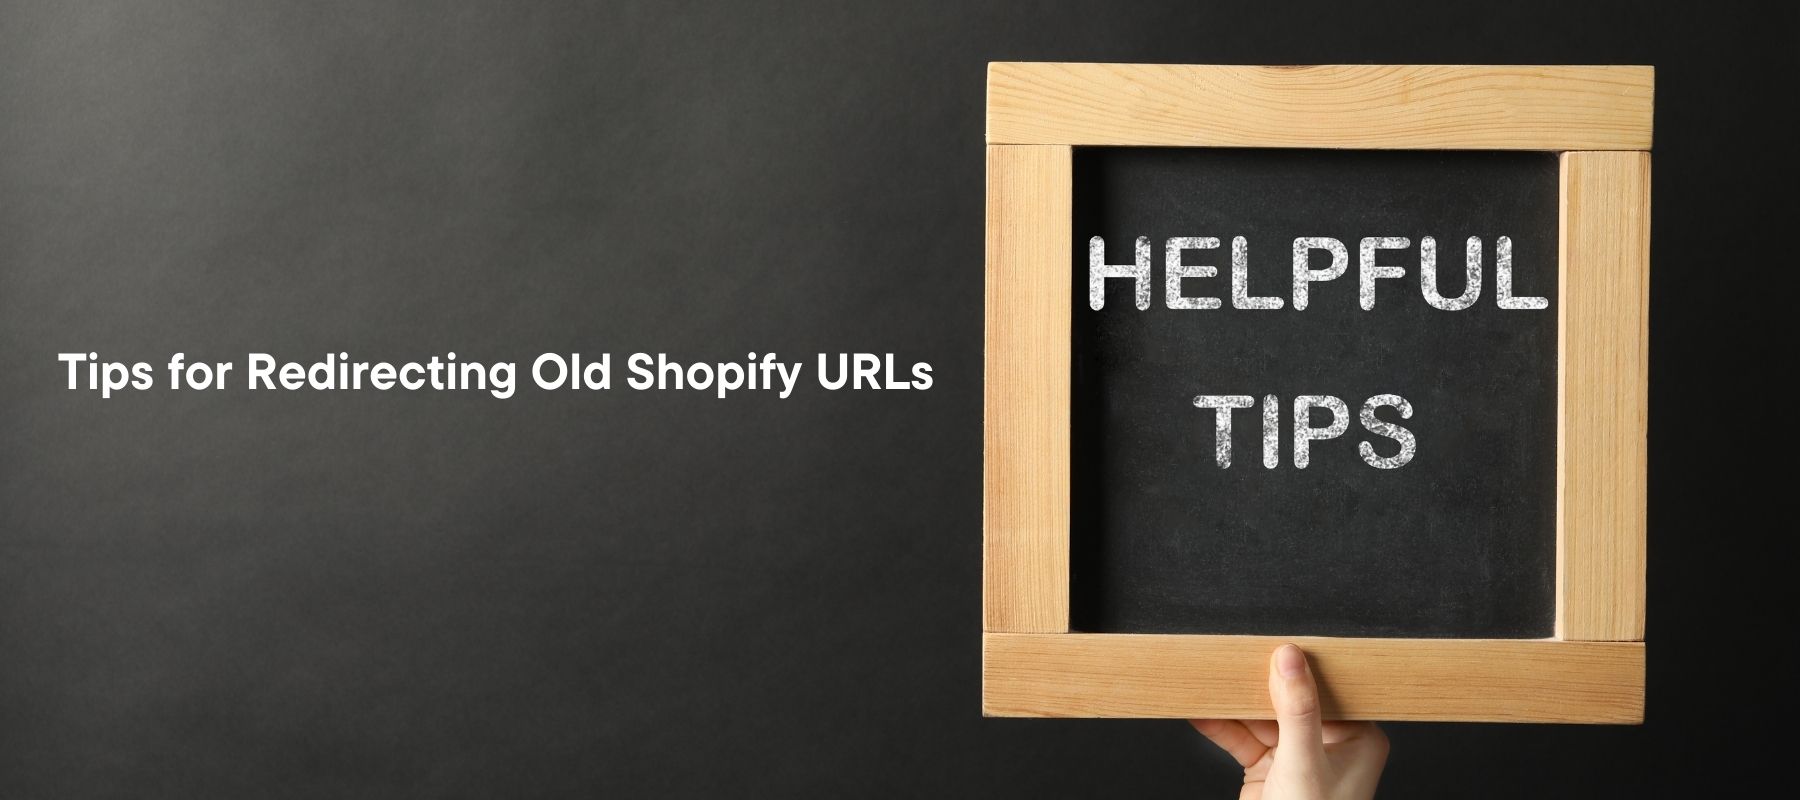 Tips for Redirecting Old Shopify URLs